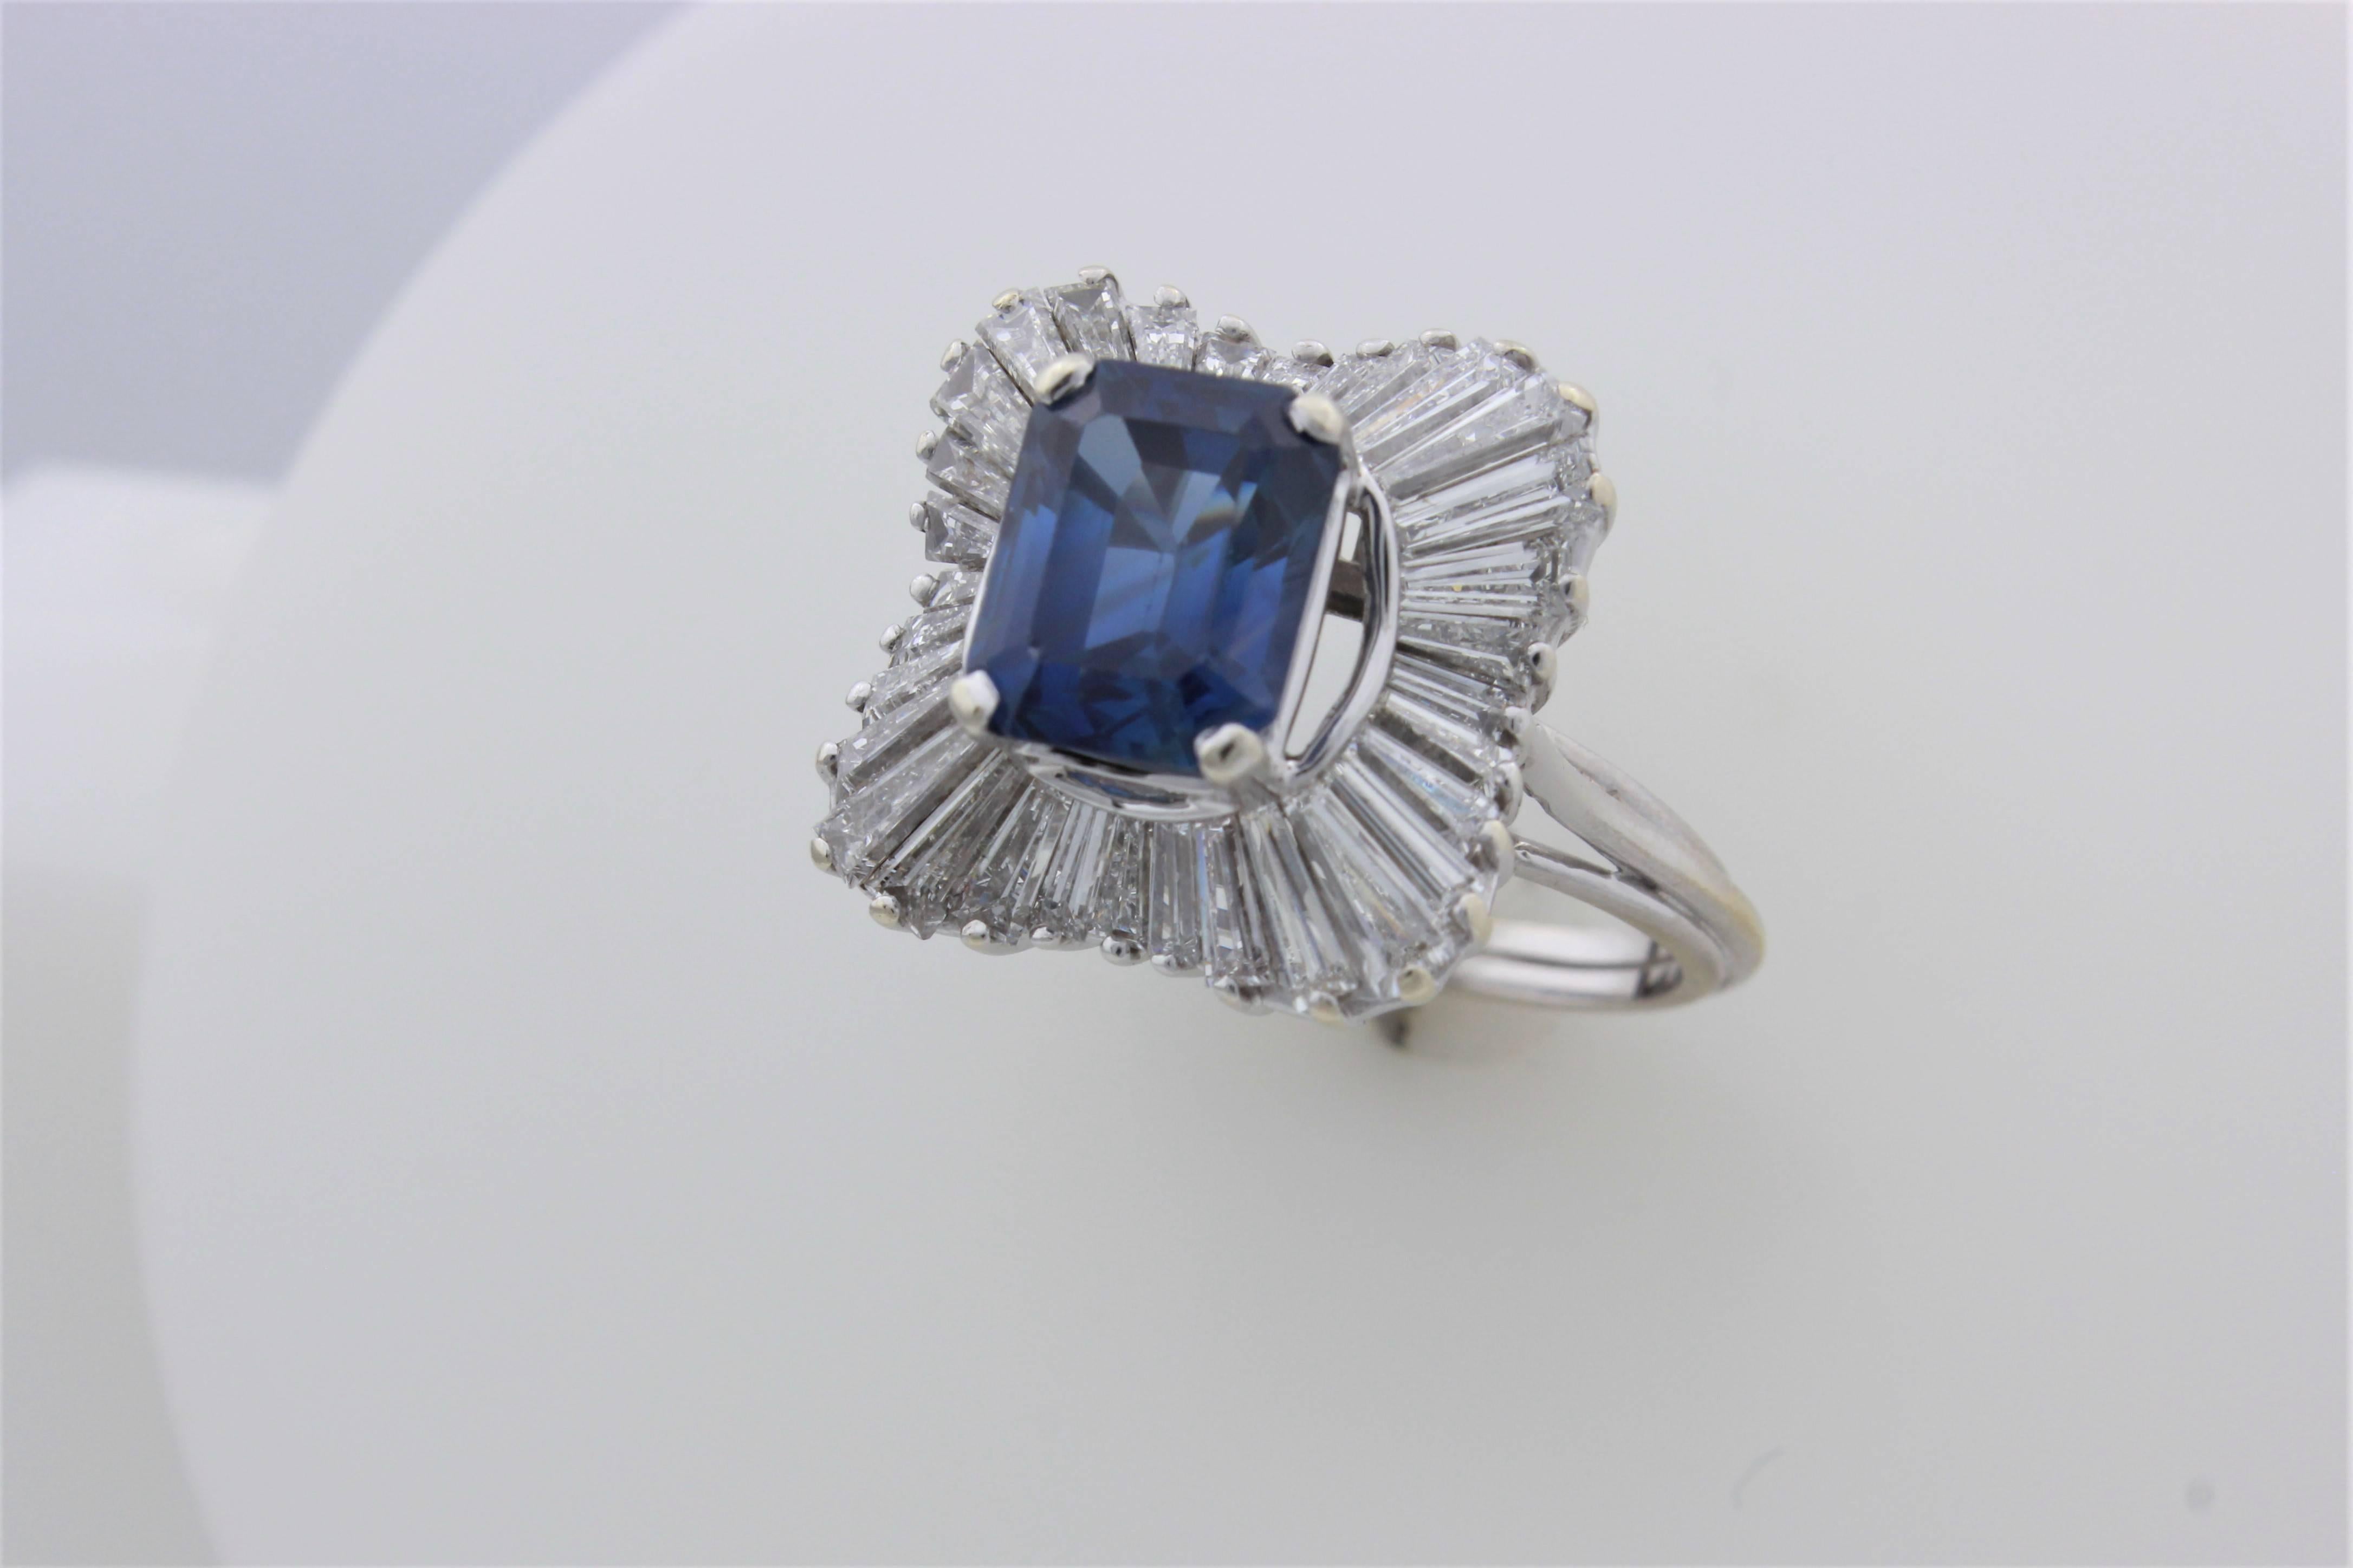 Stunning 18 karat white gold ballerina style ring with an approximately 3 1/2 carat emerald cut sapphire surrounded by approximately 4 carats of high quality (G-H color, VS clarity) baguettes!  Ring size is 6 1/2 and is sizeable.  